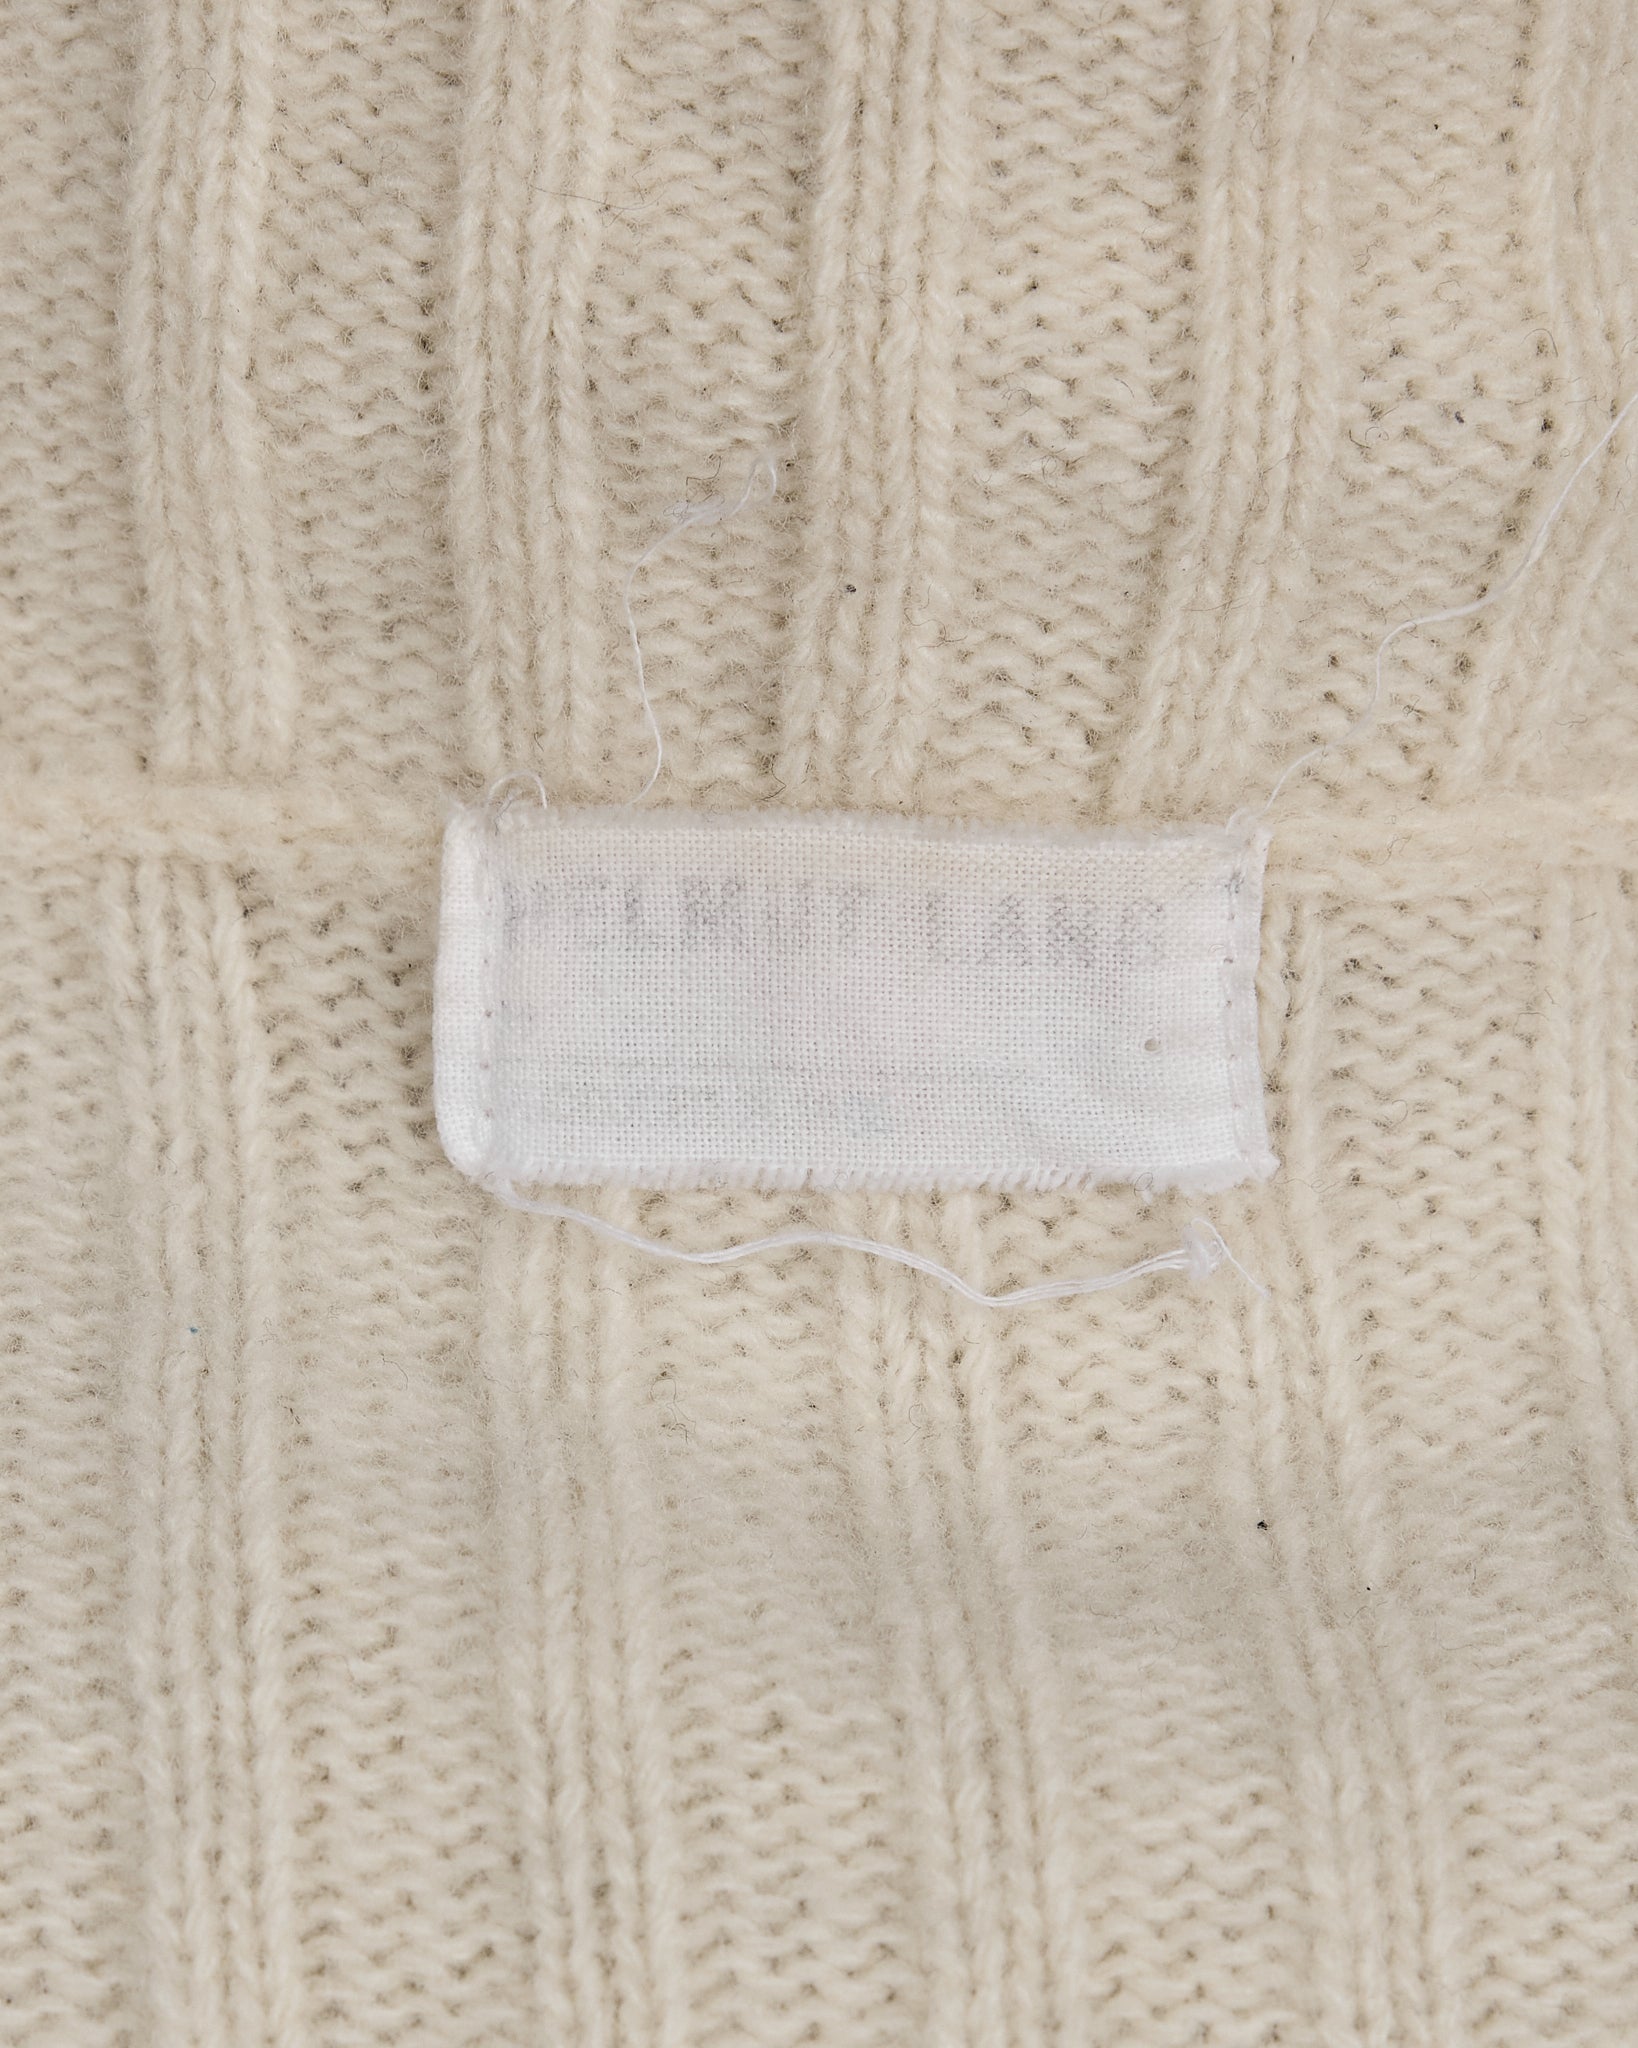 Helmut Lang Cream Ribbed Turtleneck - AW98 tag photo